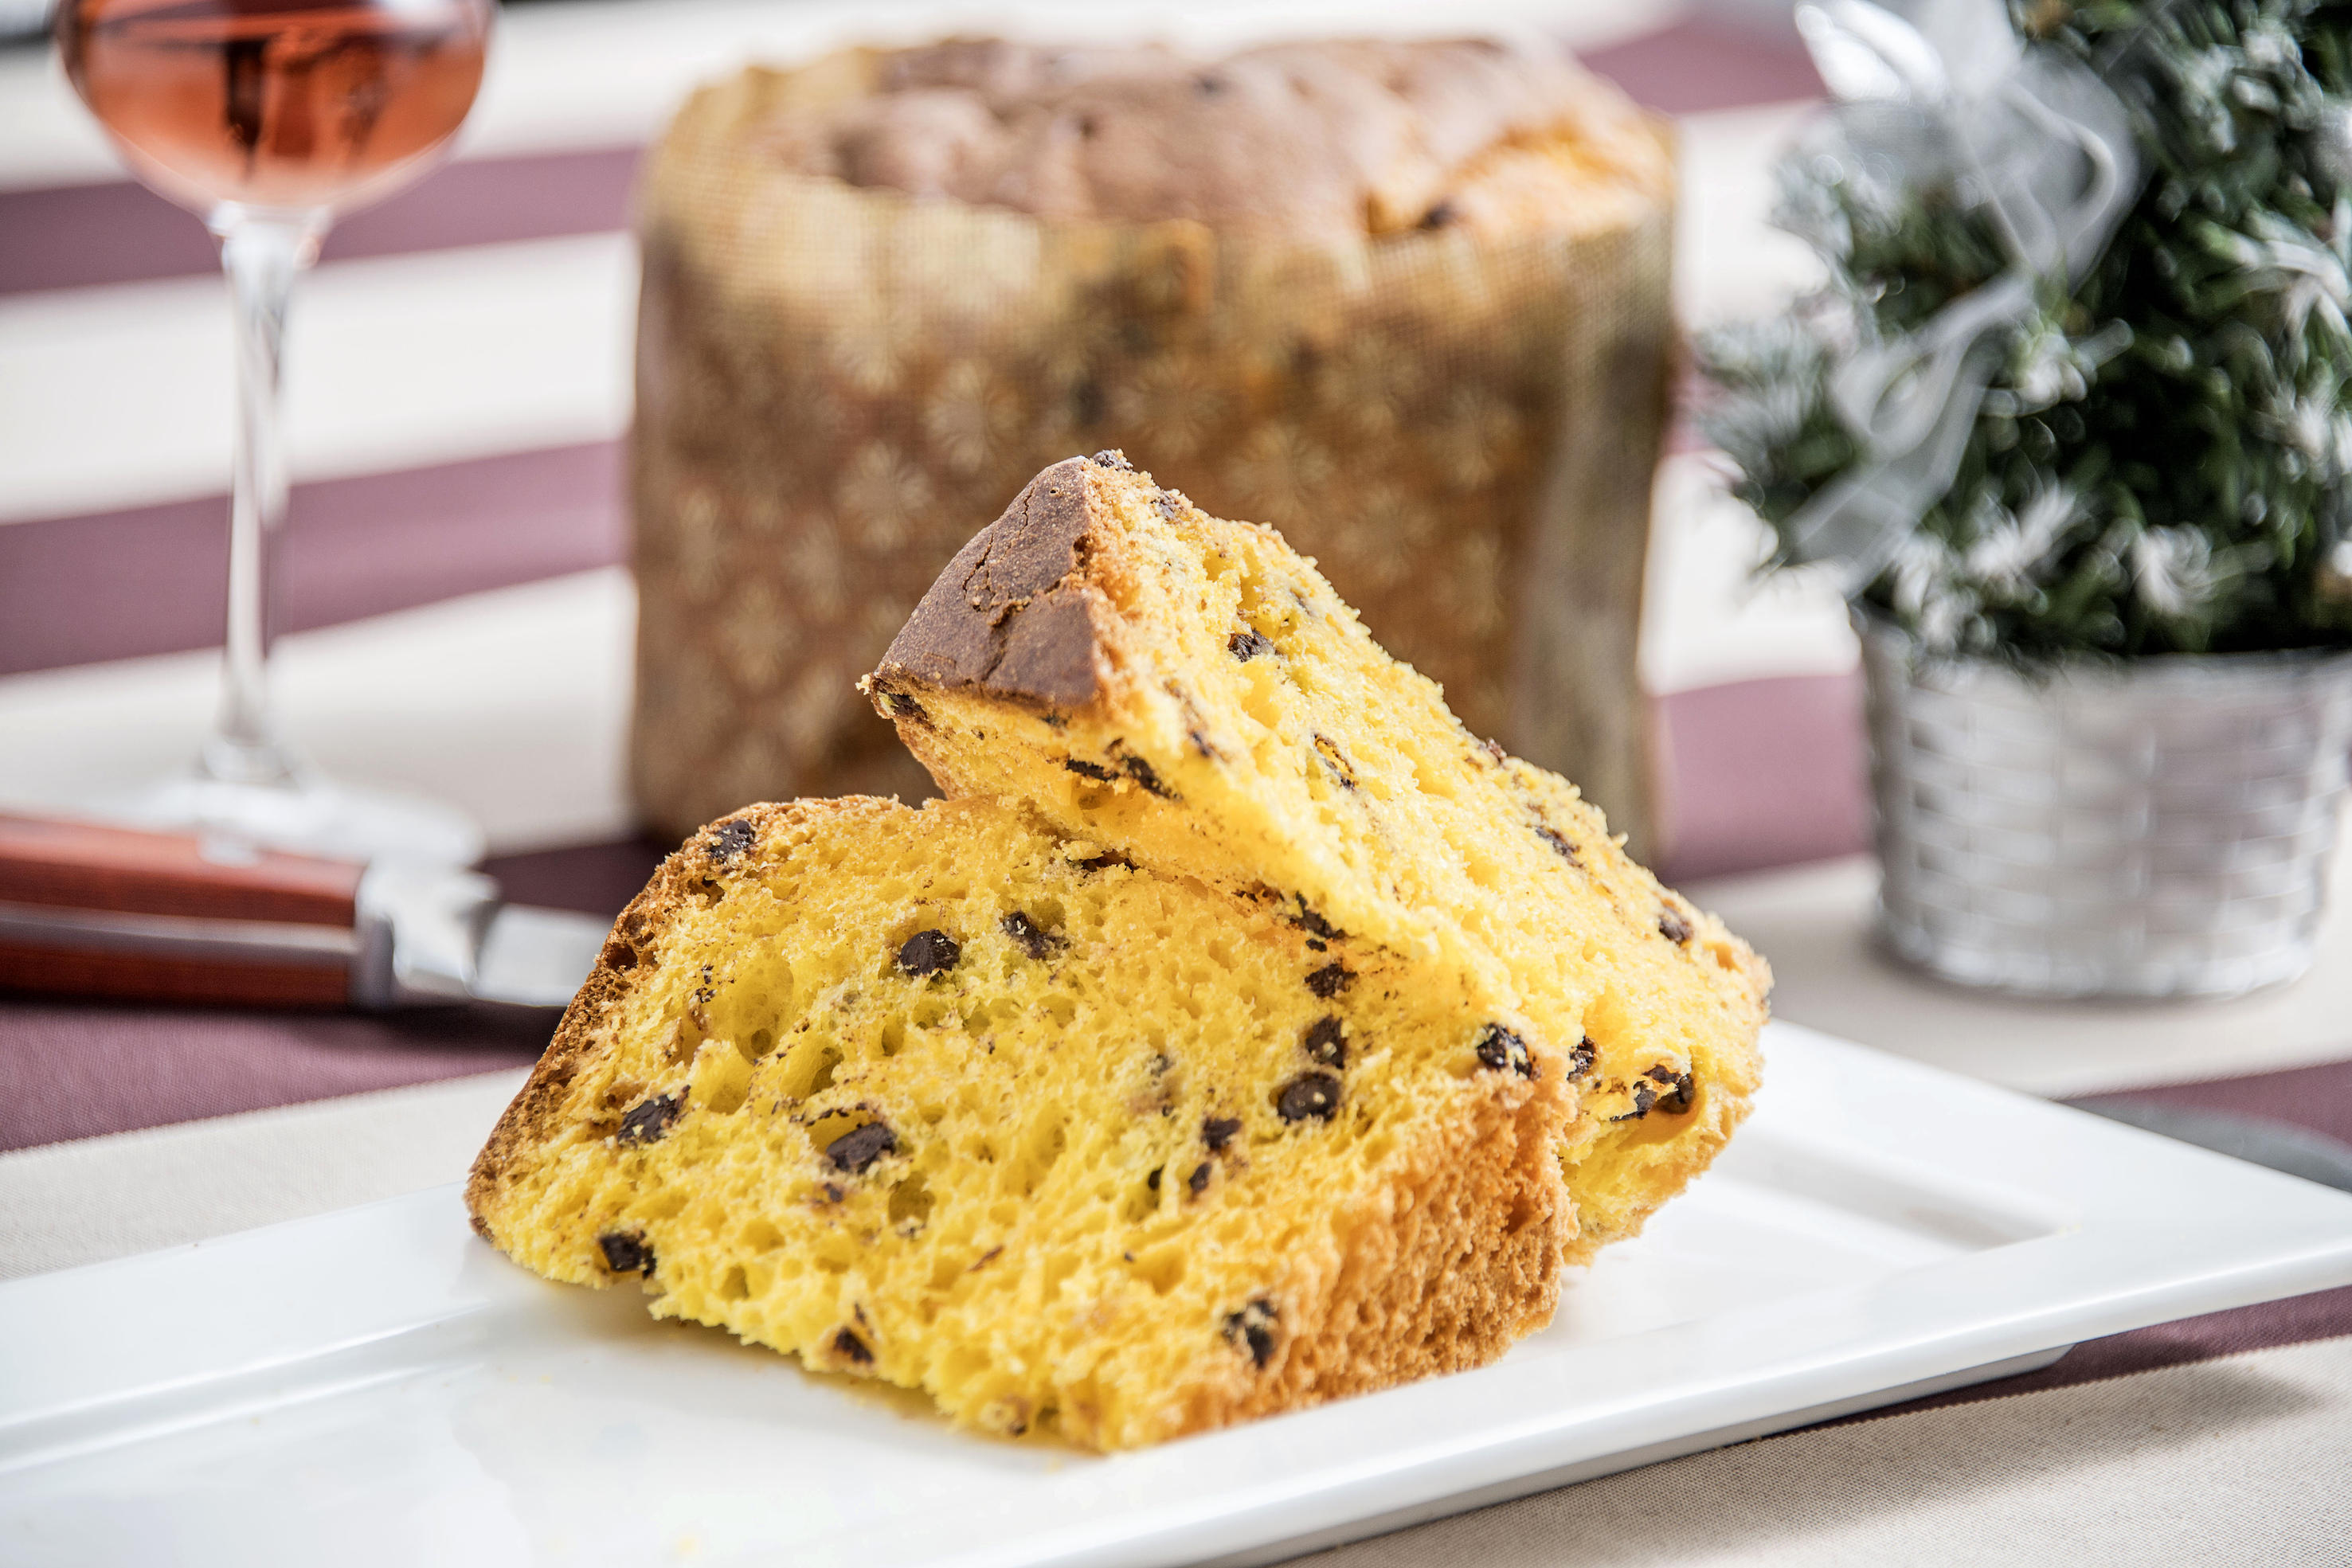 Gluten-free panettone with chocolate beans